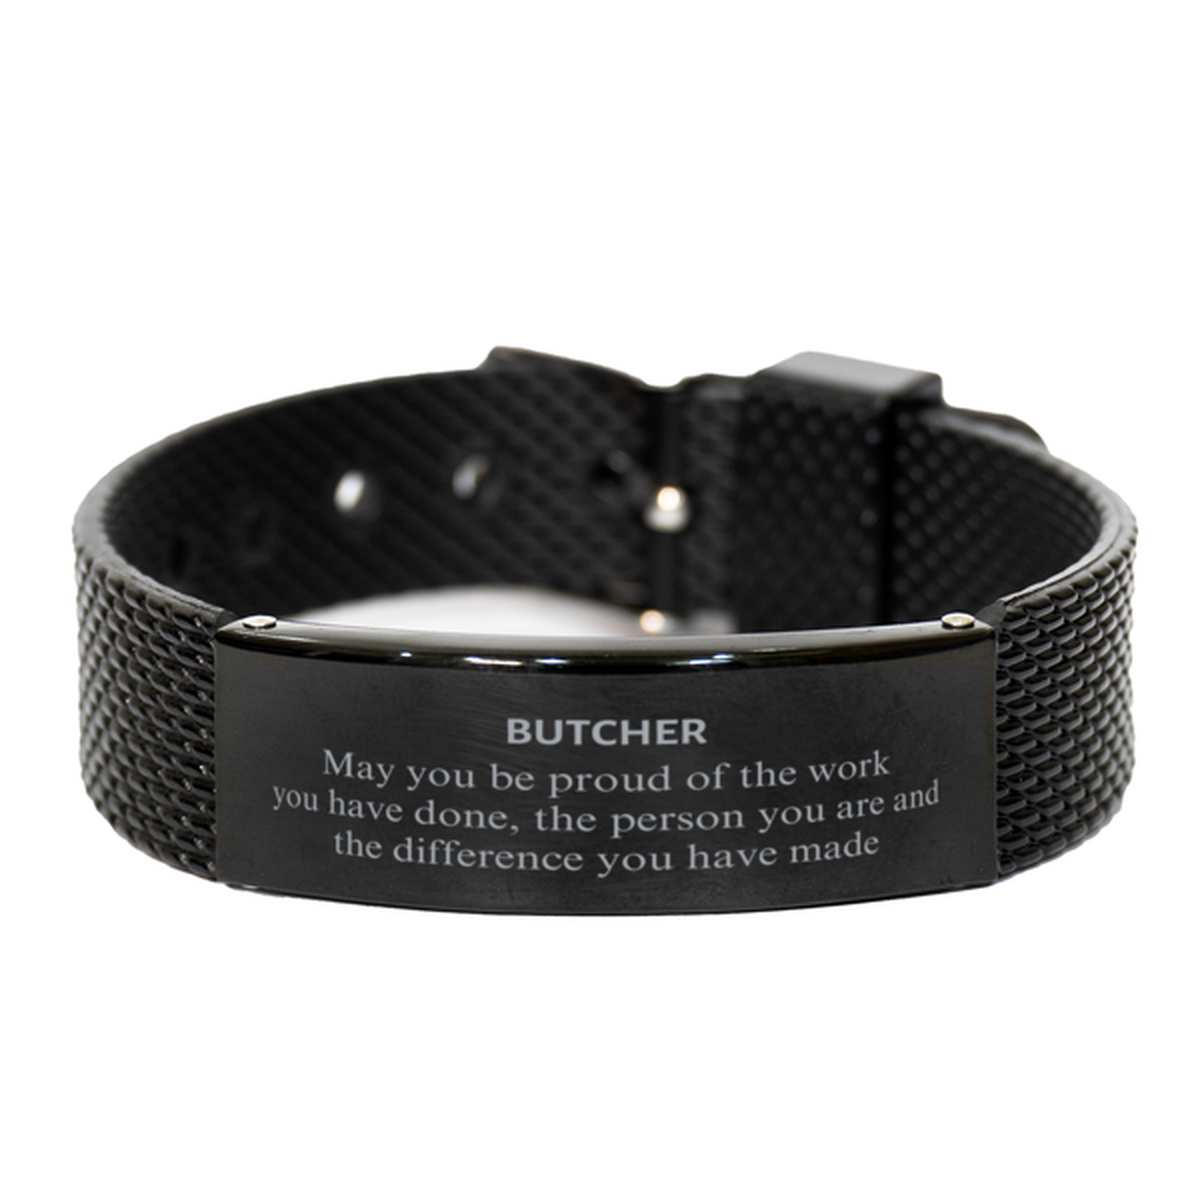 Butcher May you be proud of the work you have done, Retirement Butcher Black Shark Mesh Bracelet for Colleague Appreciation Gifts Amazing for Butcher